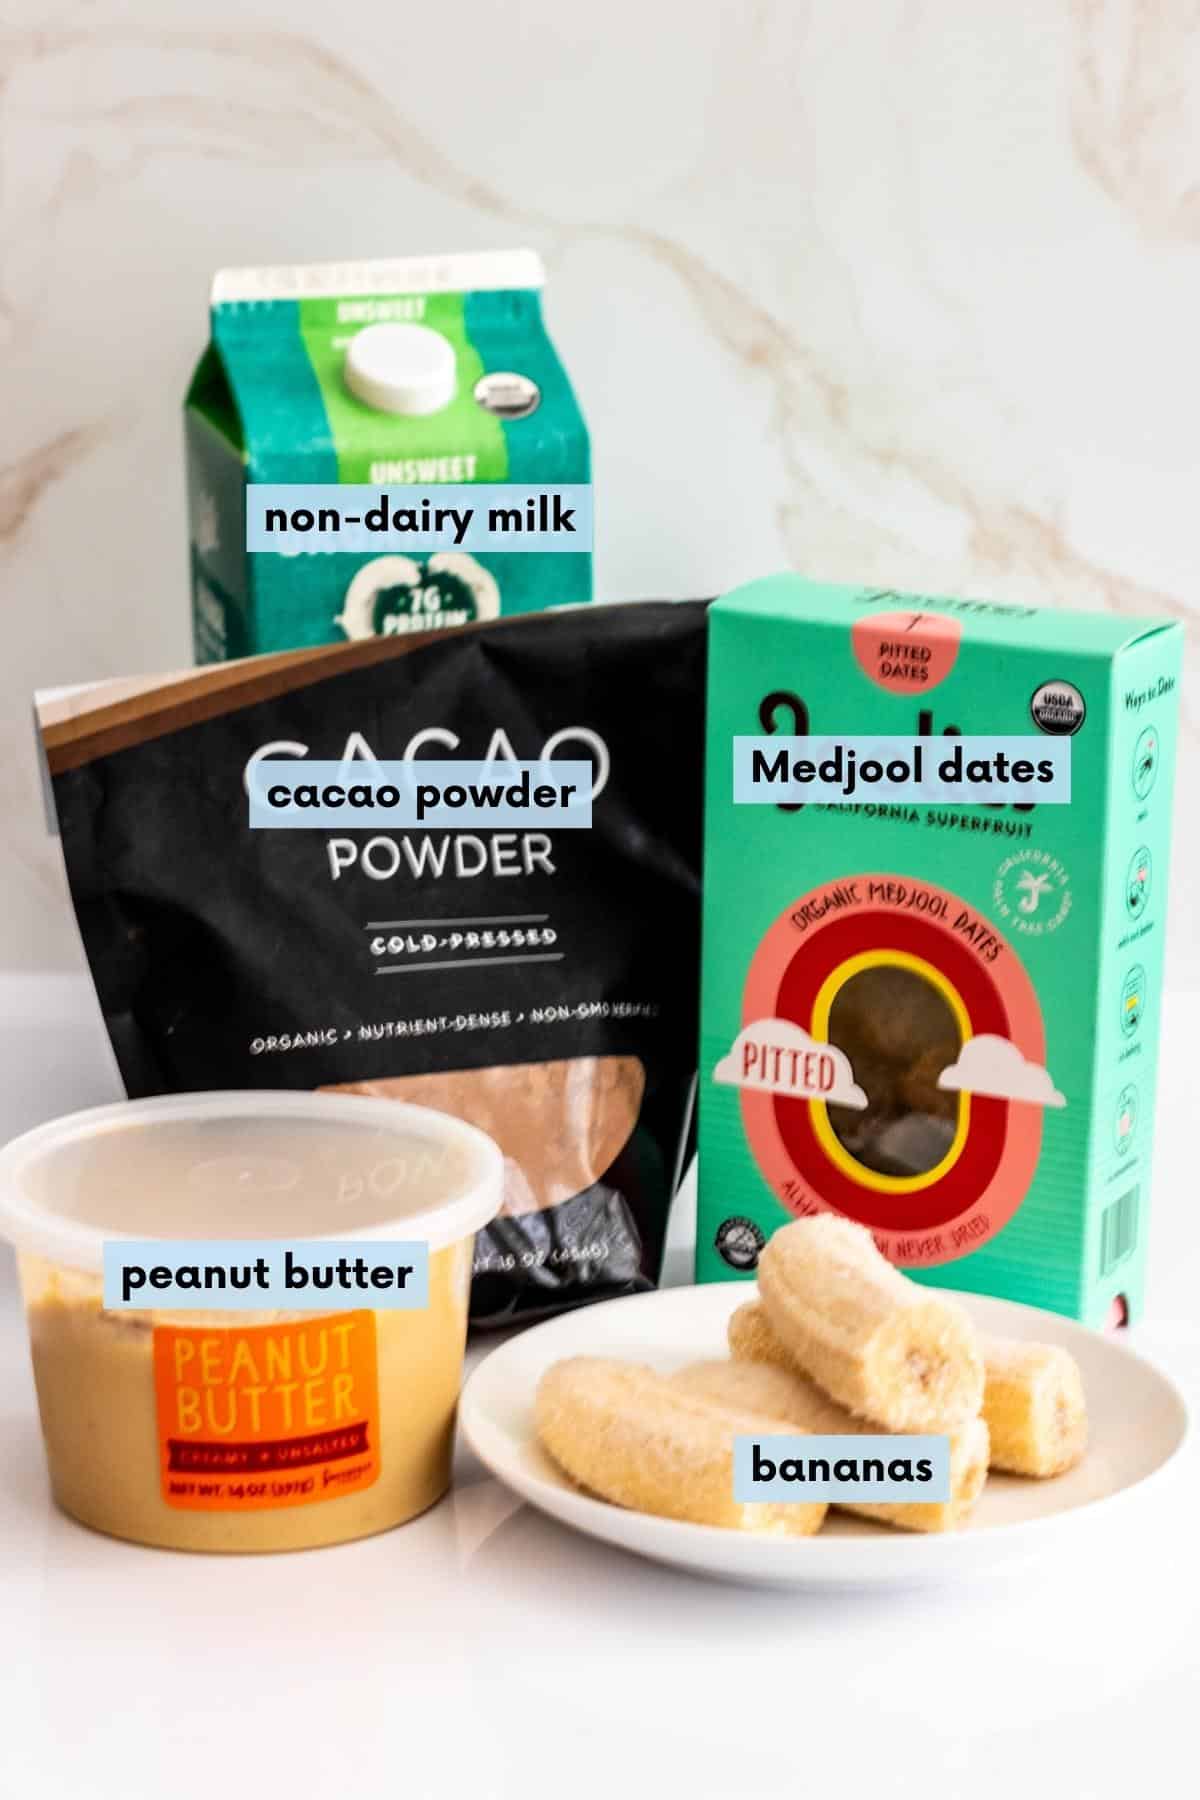 Container of peanut butter, plate with frozen banana halves, bag of cacao powder, carton of non-dairy milk, and box of Medjool dates on a kitchen counter.